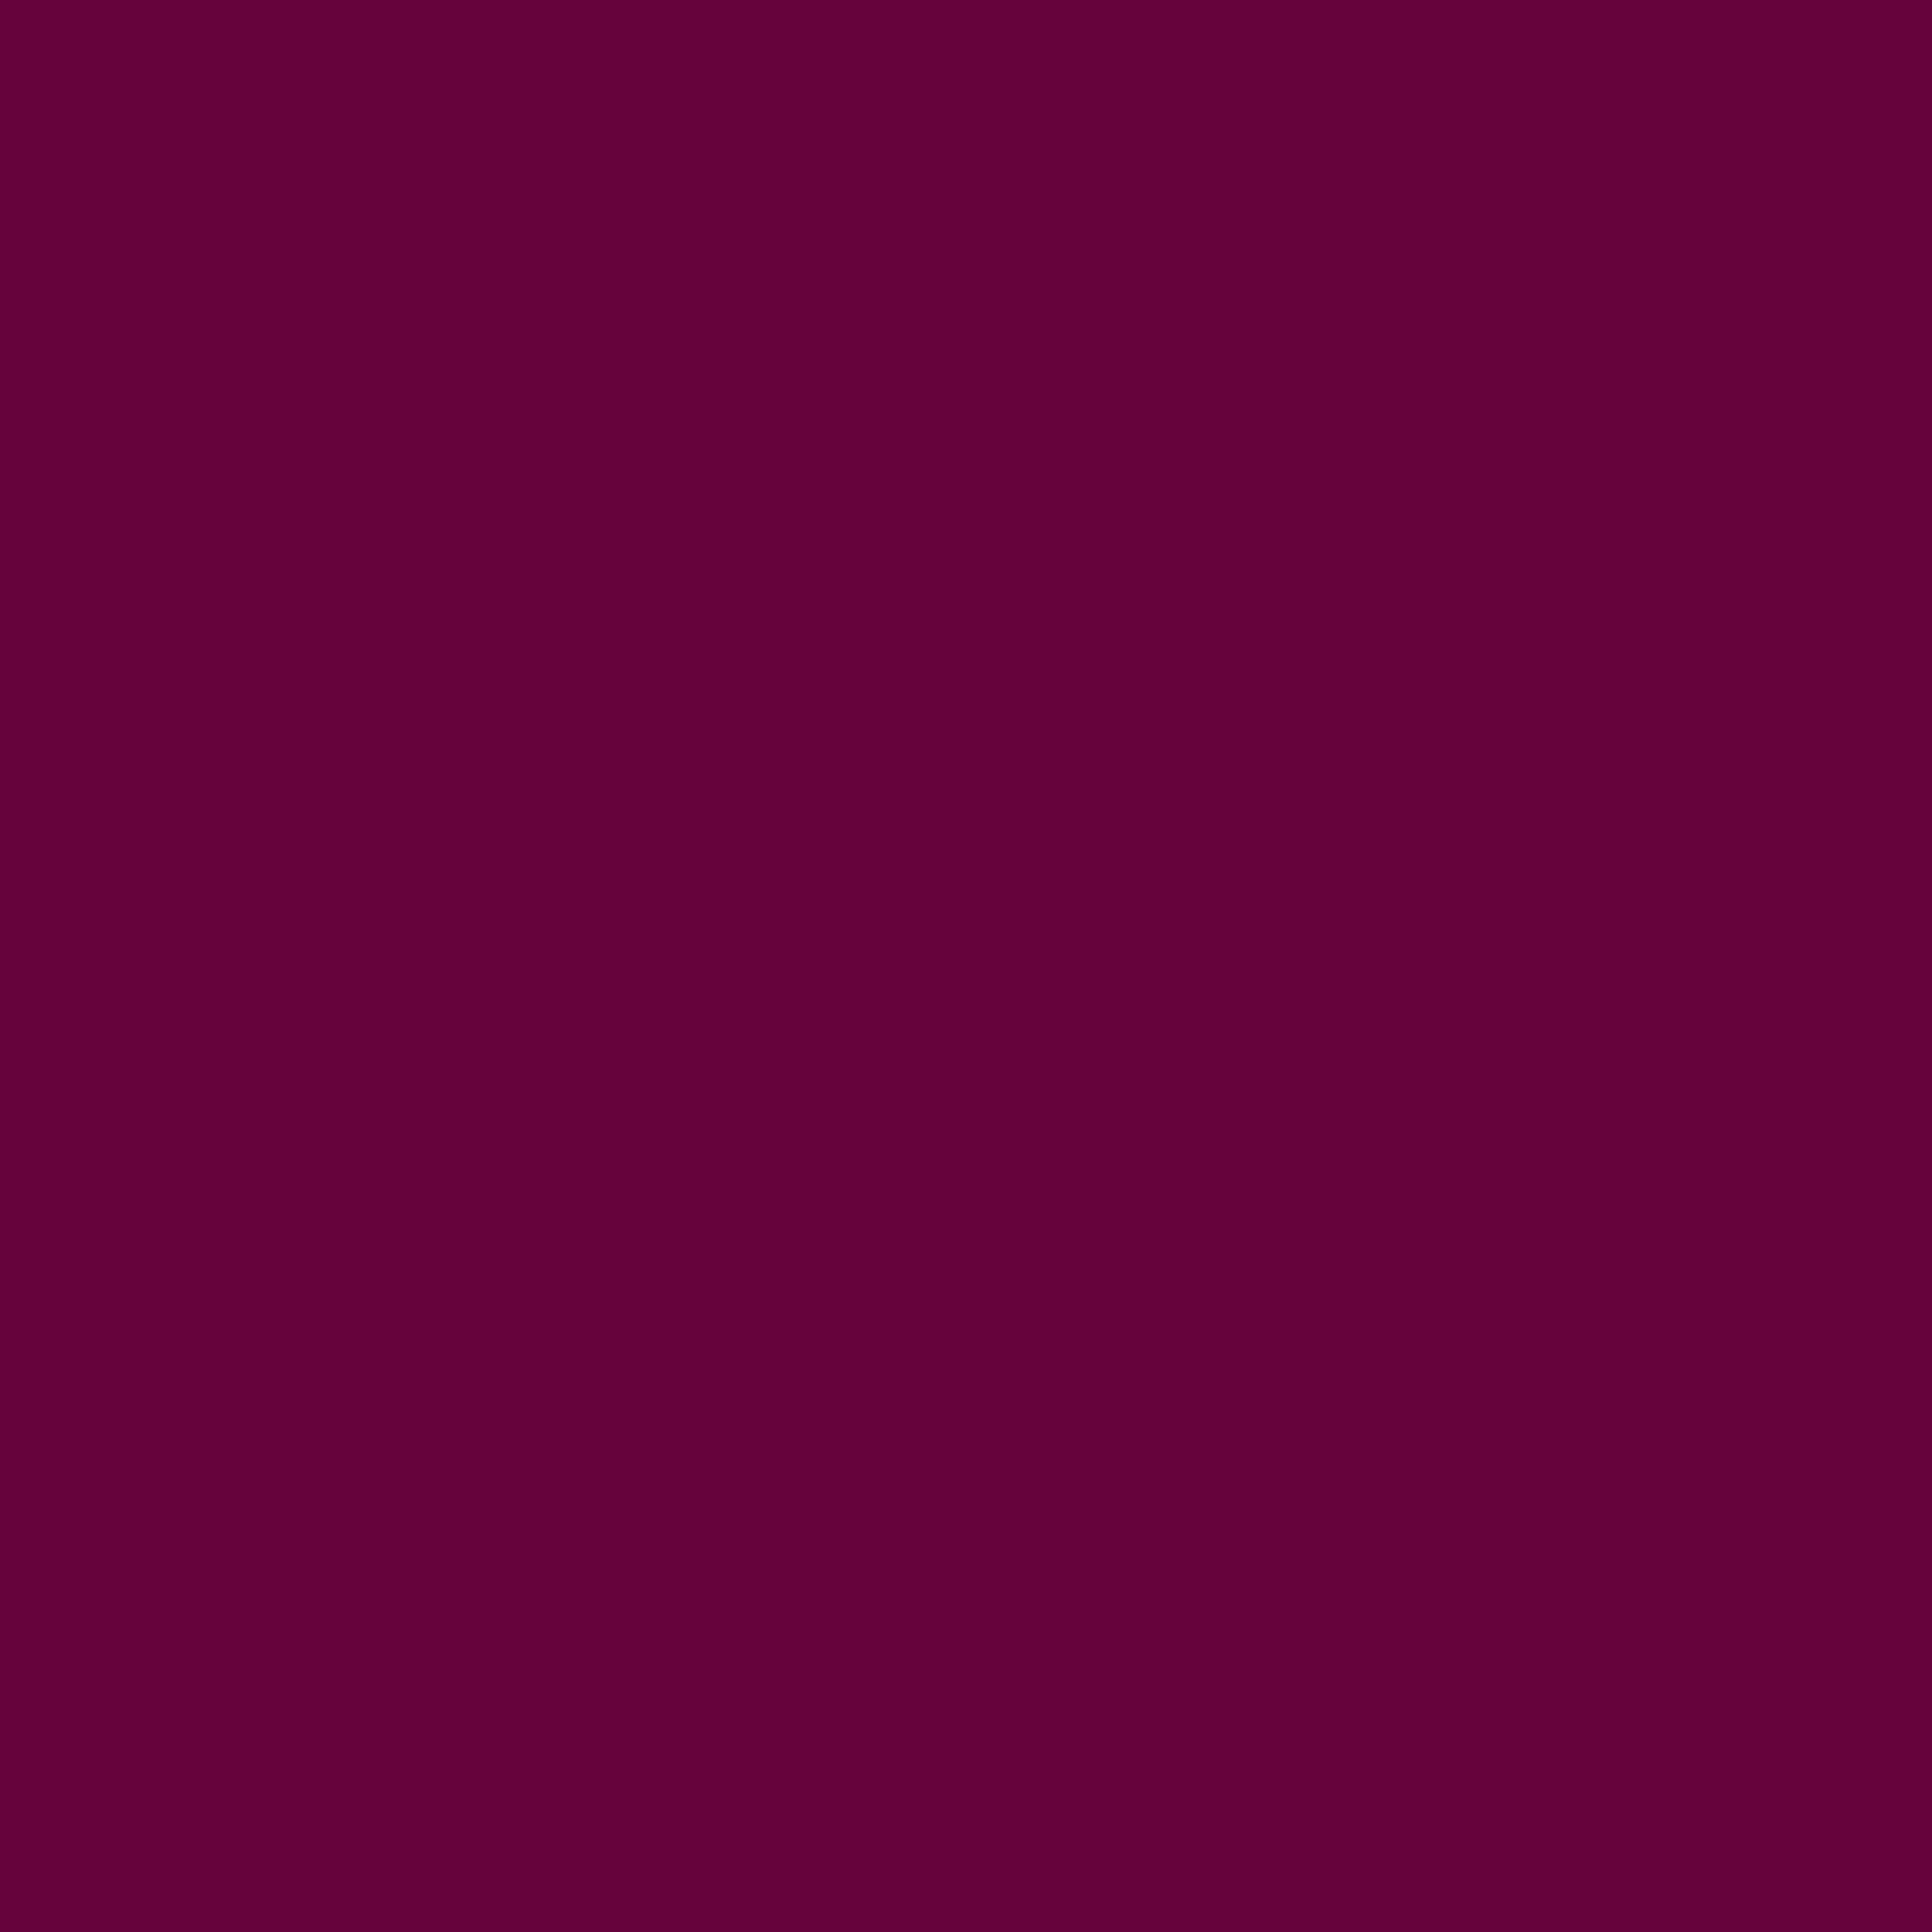 2732x2732 Imperial Purple Solid Color Background